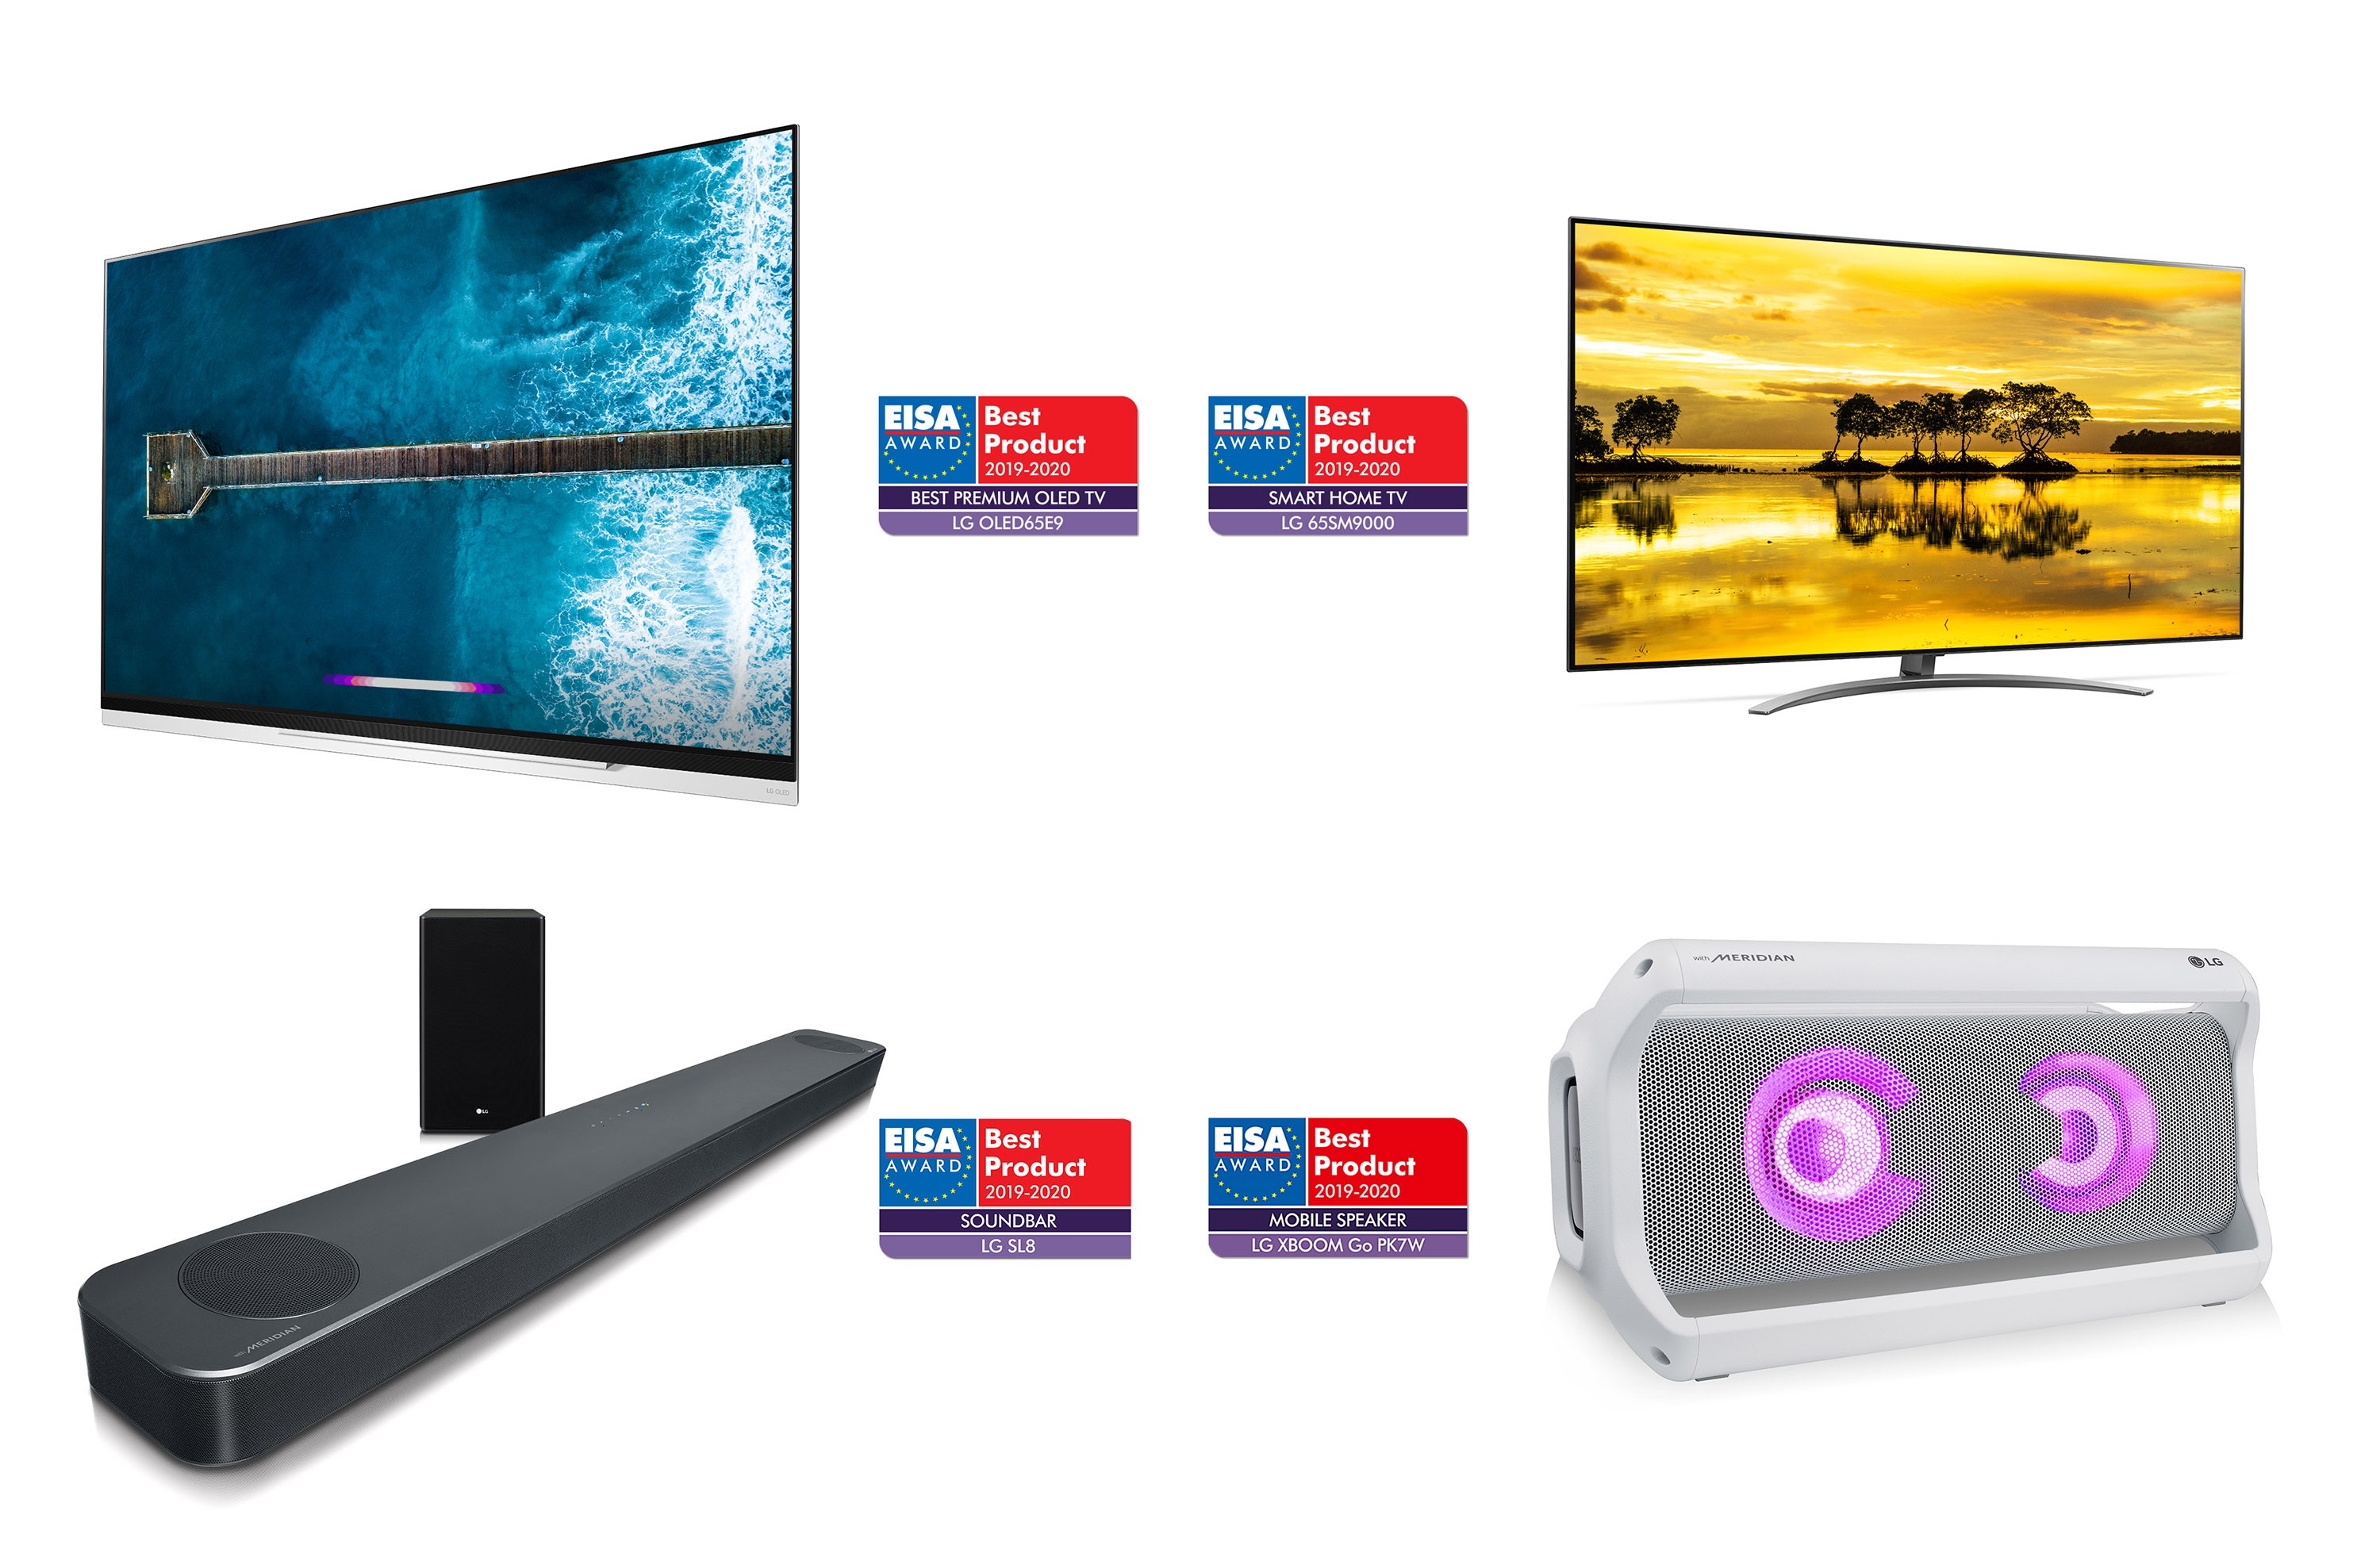 LG’s AI-enabled products including the LG OLED TV model OLED65E9 and LG NanoCell TV model 65SM9000 on top, and the LG Soundbar model SL8YG and LG XBOOM Go model PK7 at the bottom, with the corresponding EISA Award logo at each product’s side.